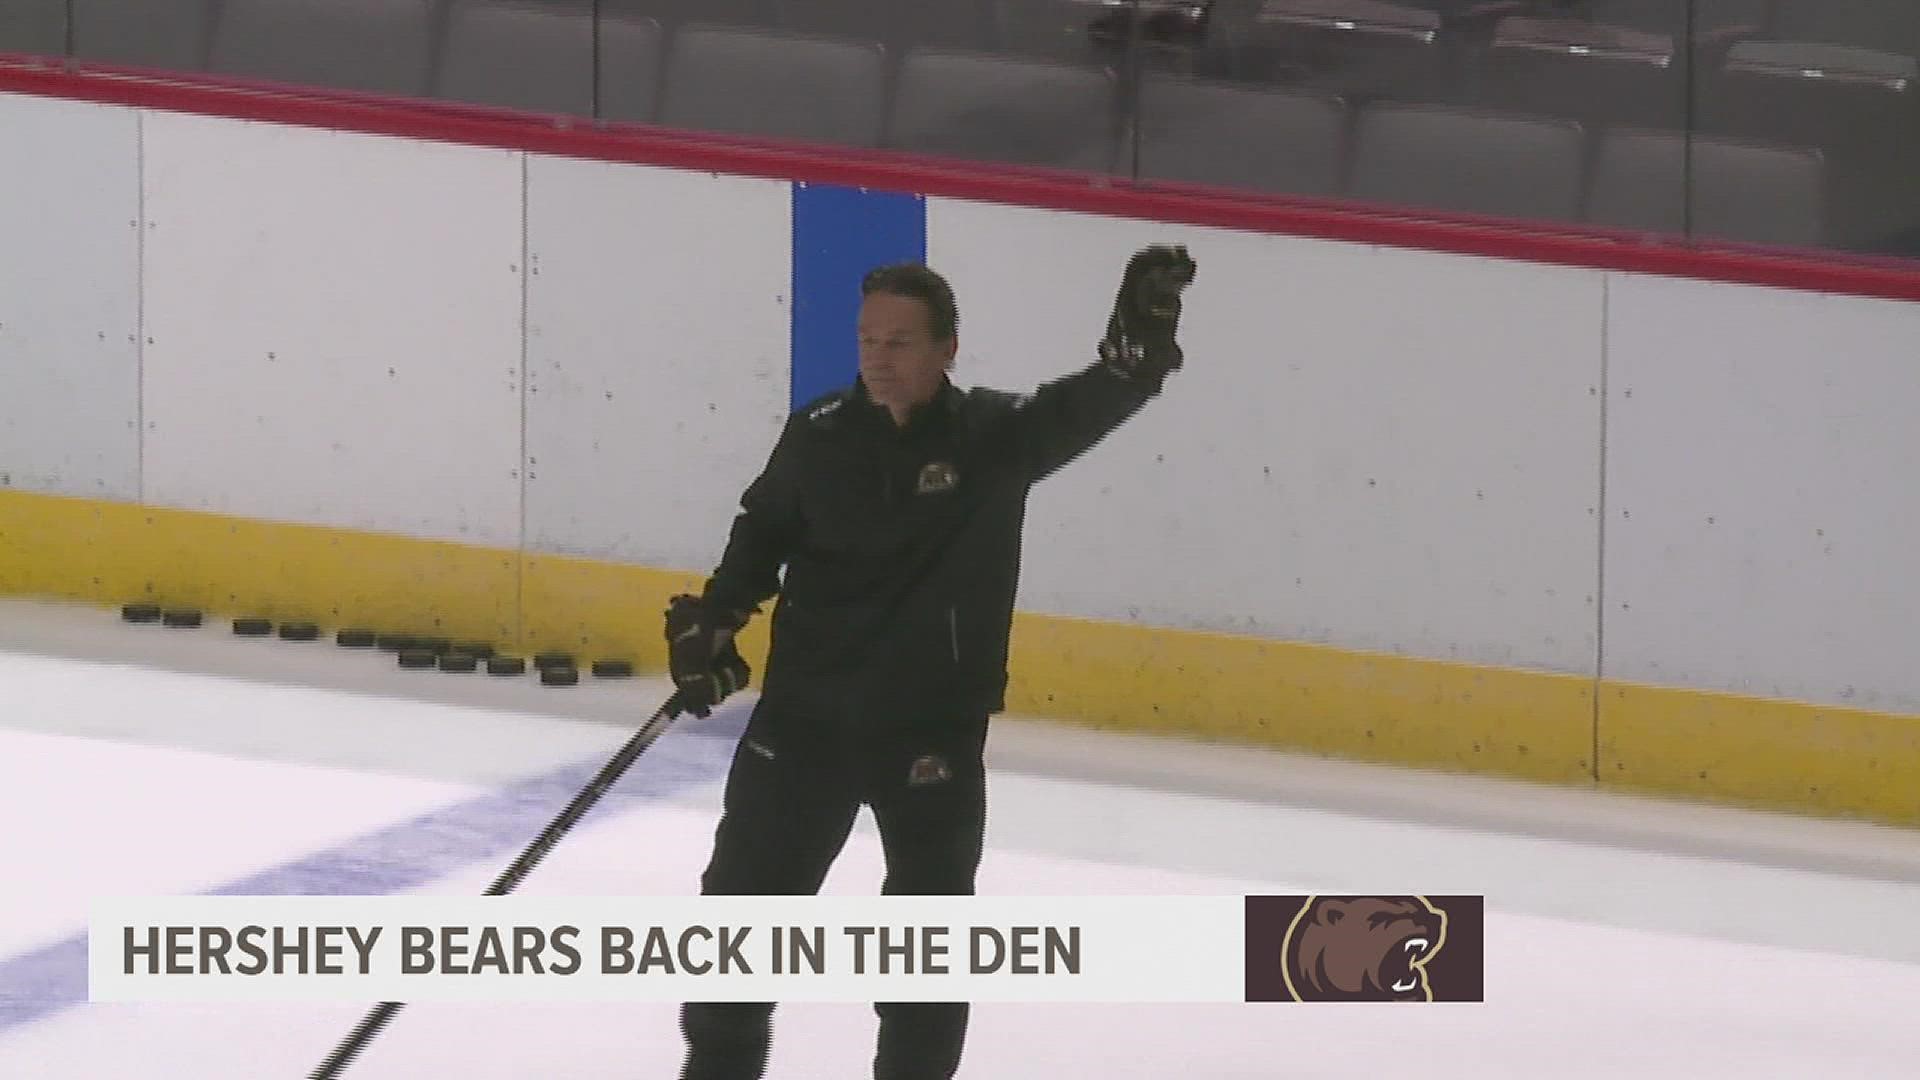 Chocolatetown's favorite team is back on the ice and gearing up for the 2021 season.